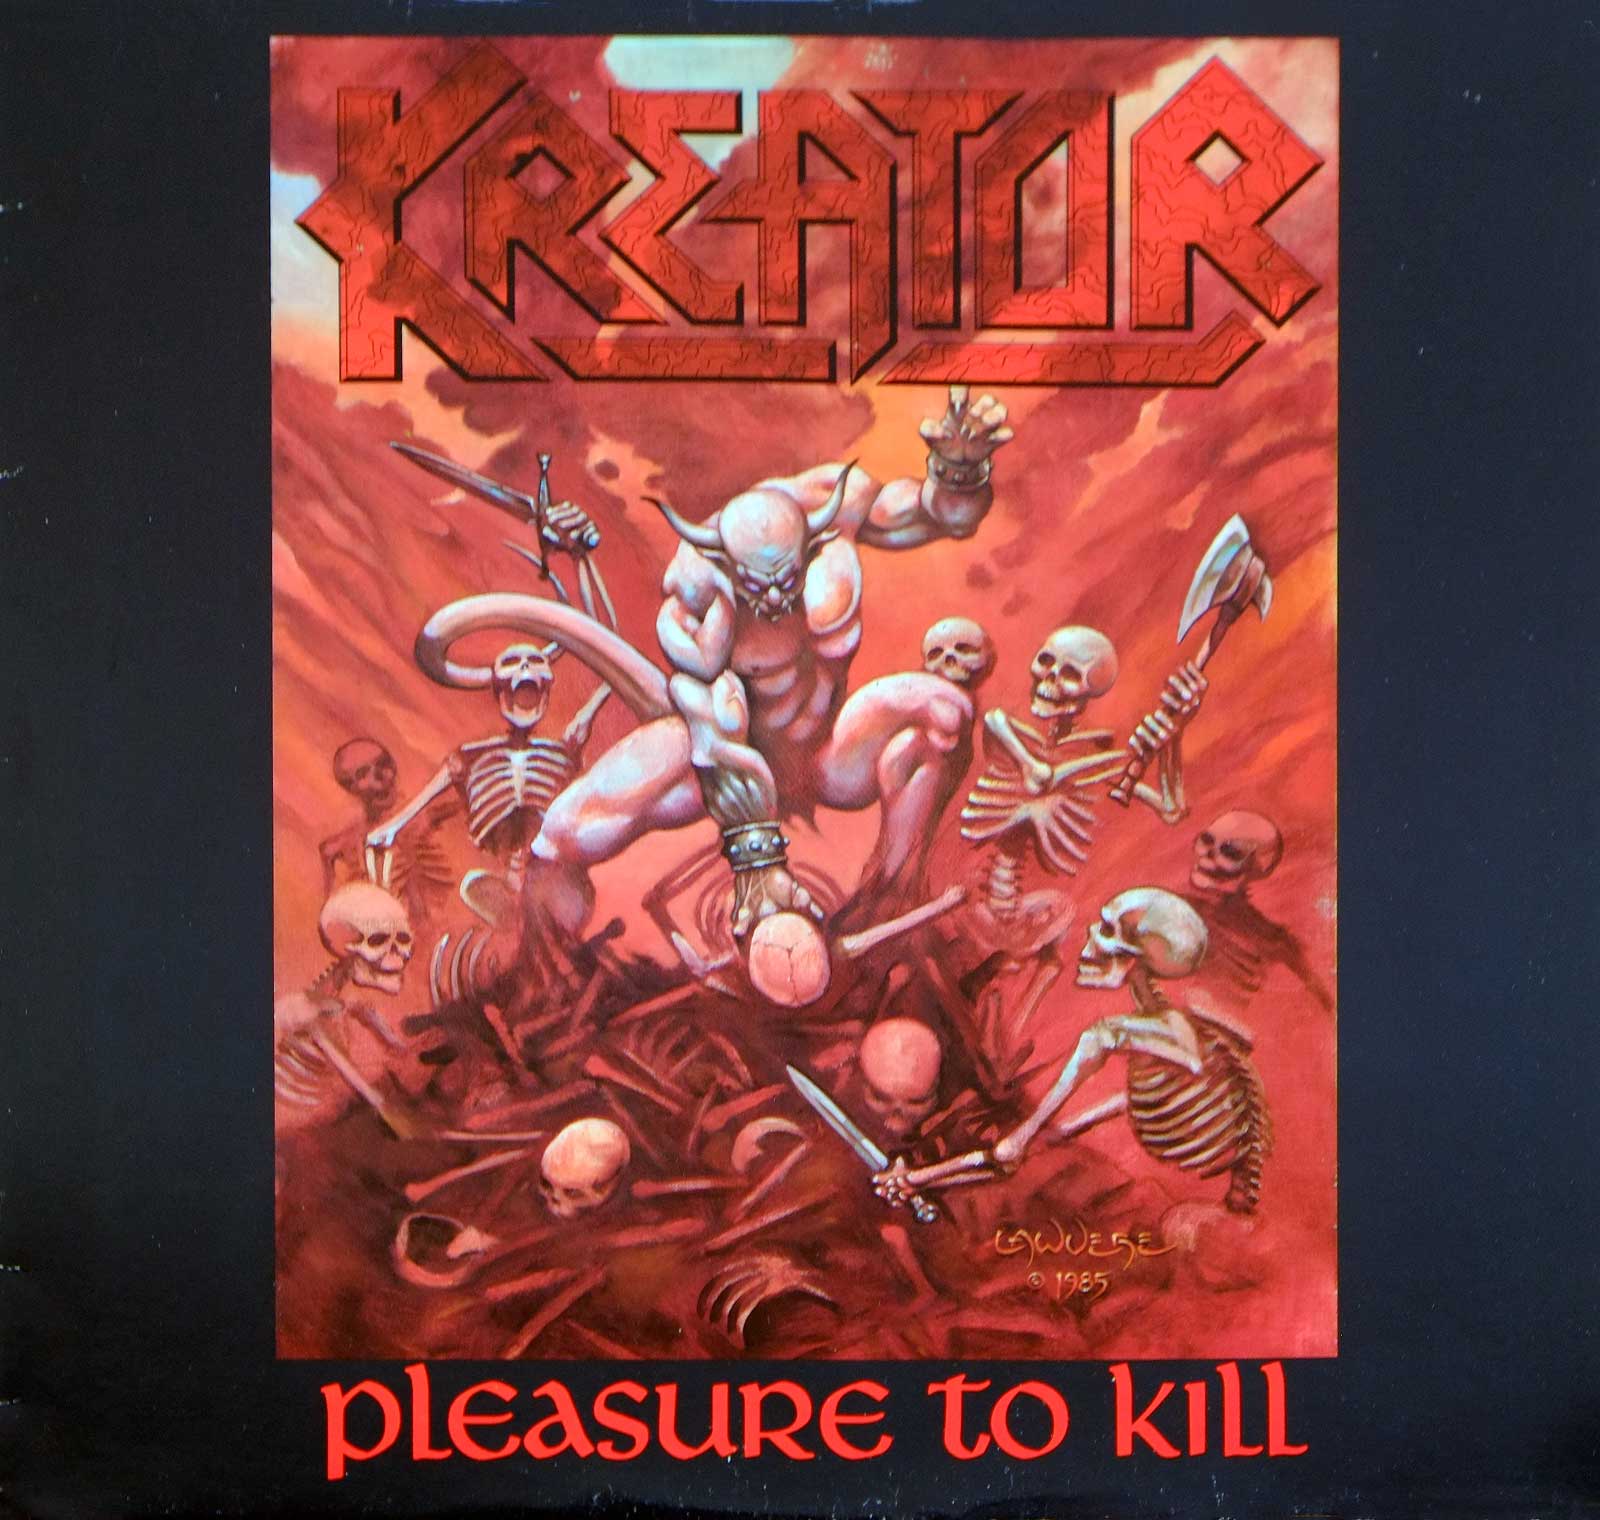 large album front cover photo of: KREATOR PLEASURE TO KILL 